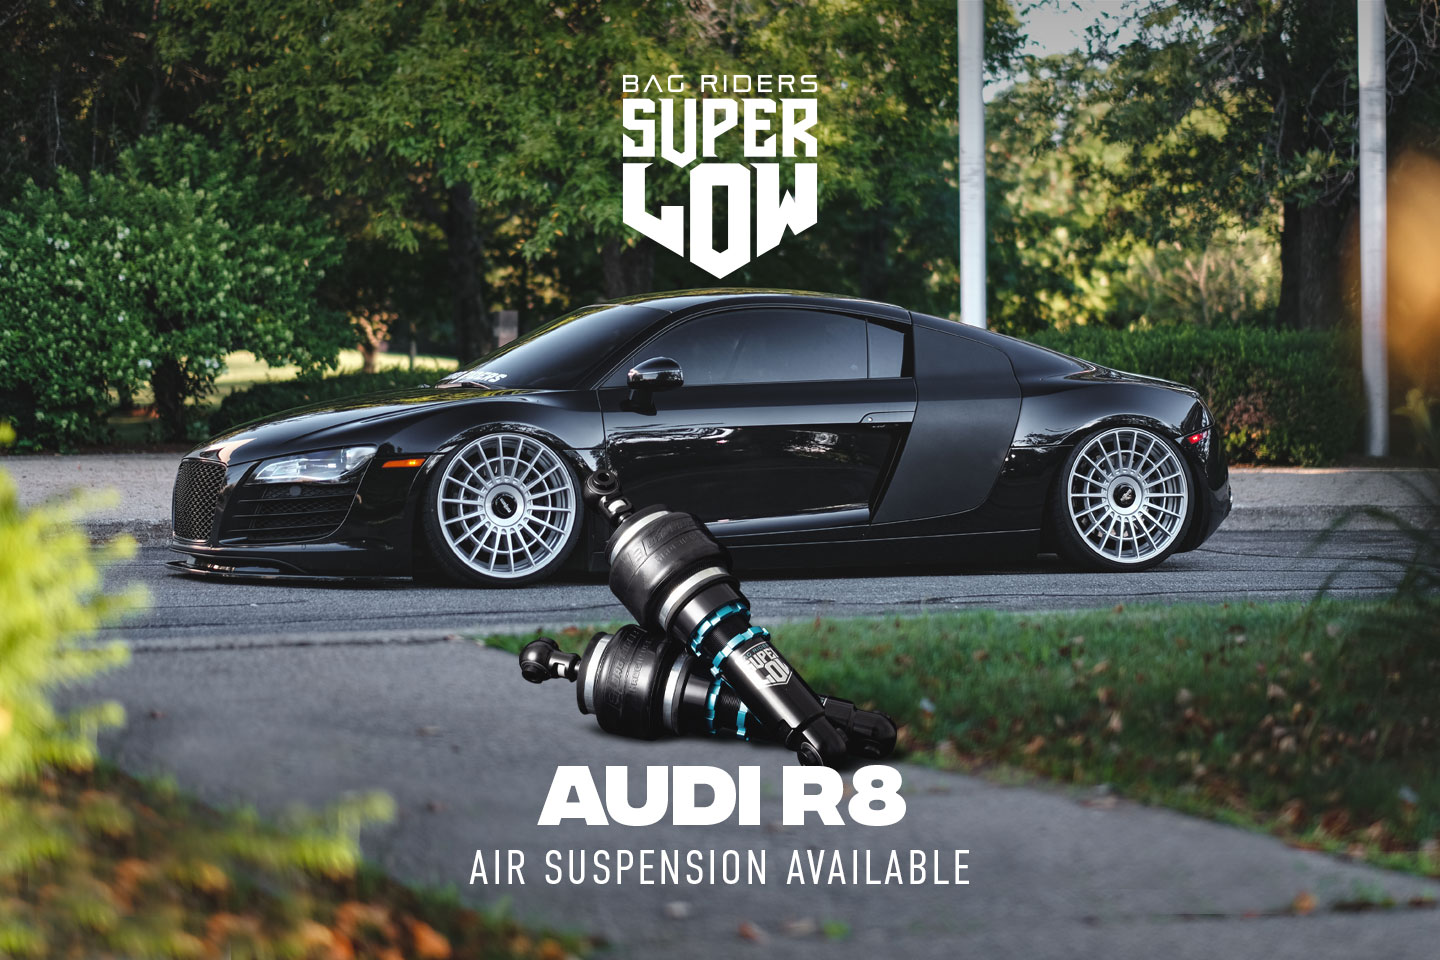 Audi R8 Super Low Air Ride Kit Available Now!